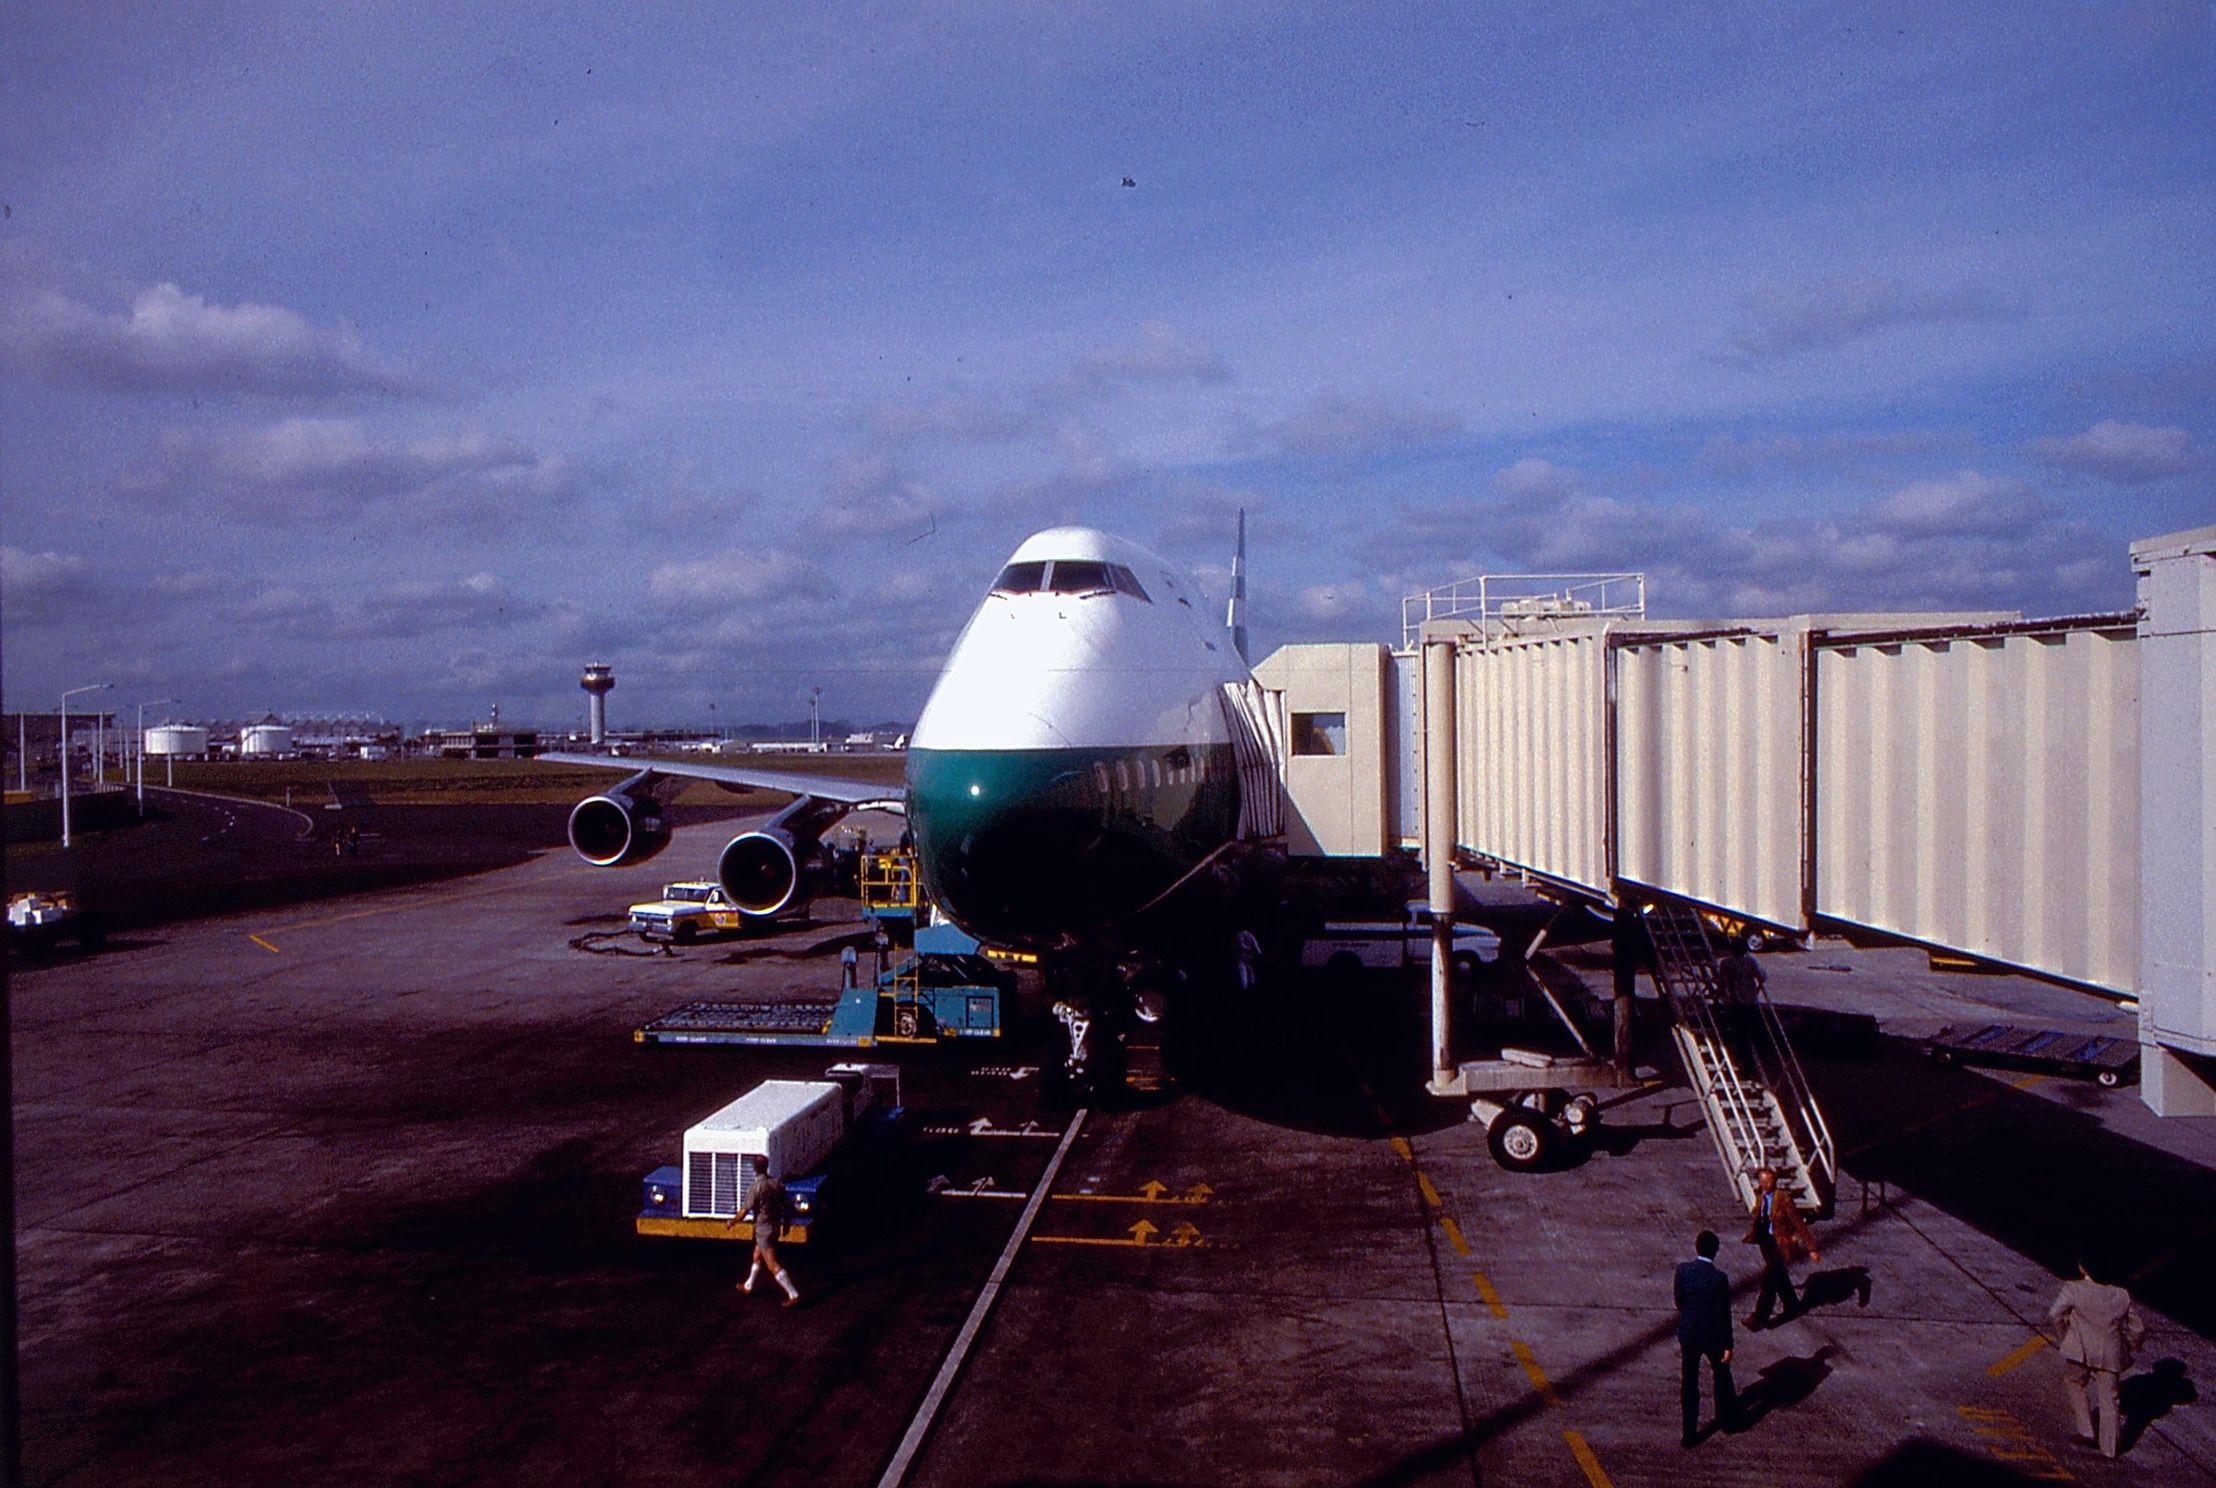 A Cathay Pacific Boeing 747-200 parked at the gate.